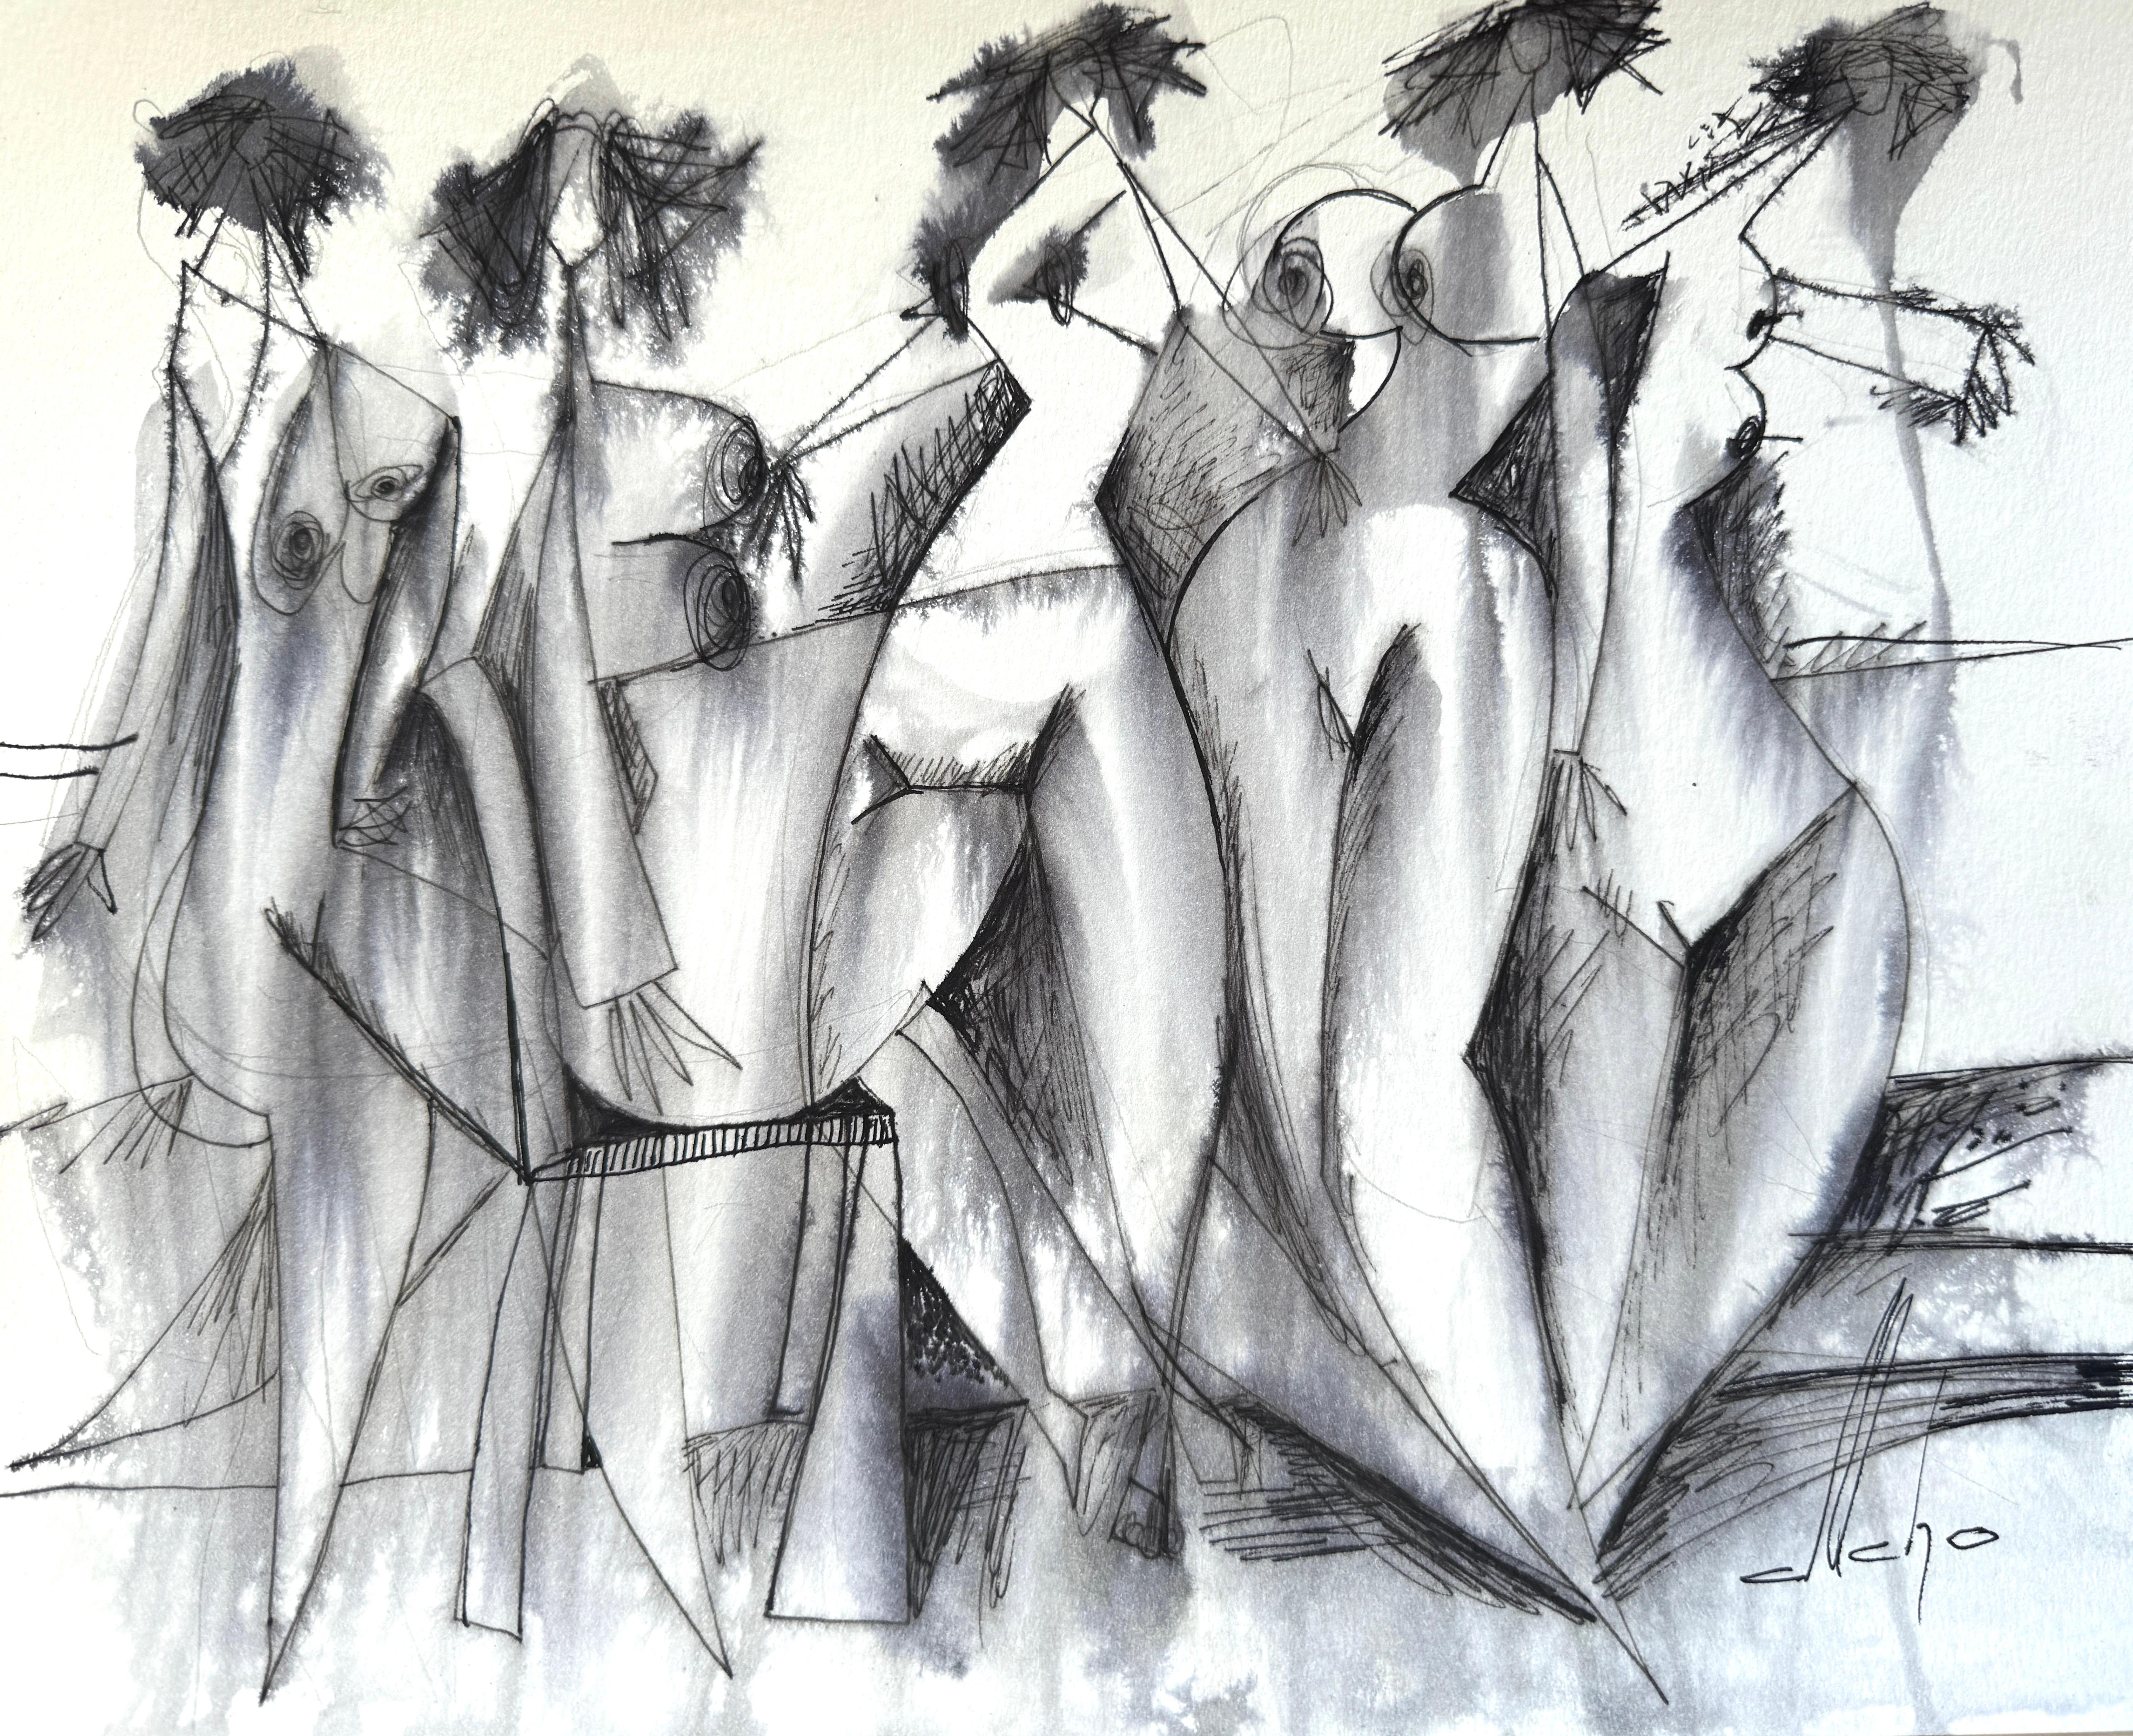 Mkrtich Sarkisyan (Mcho) Figurative Art - Stream, Abstract Figurative, Original Painting, Ink on Paper, Black and White 